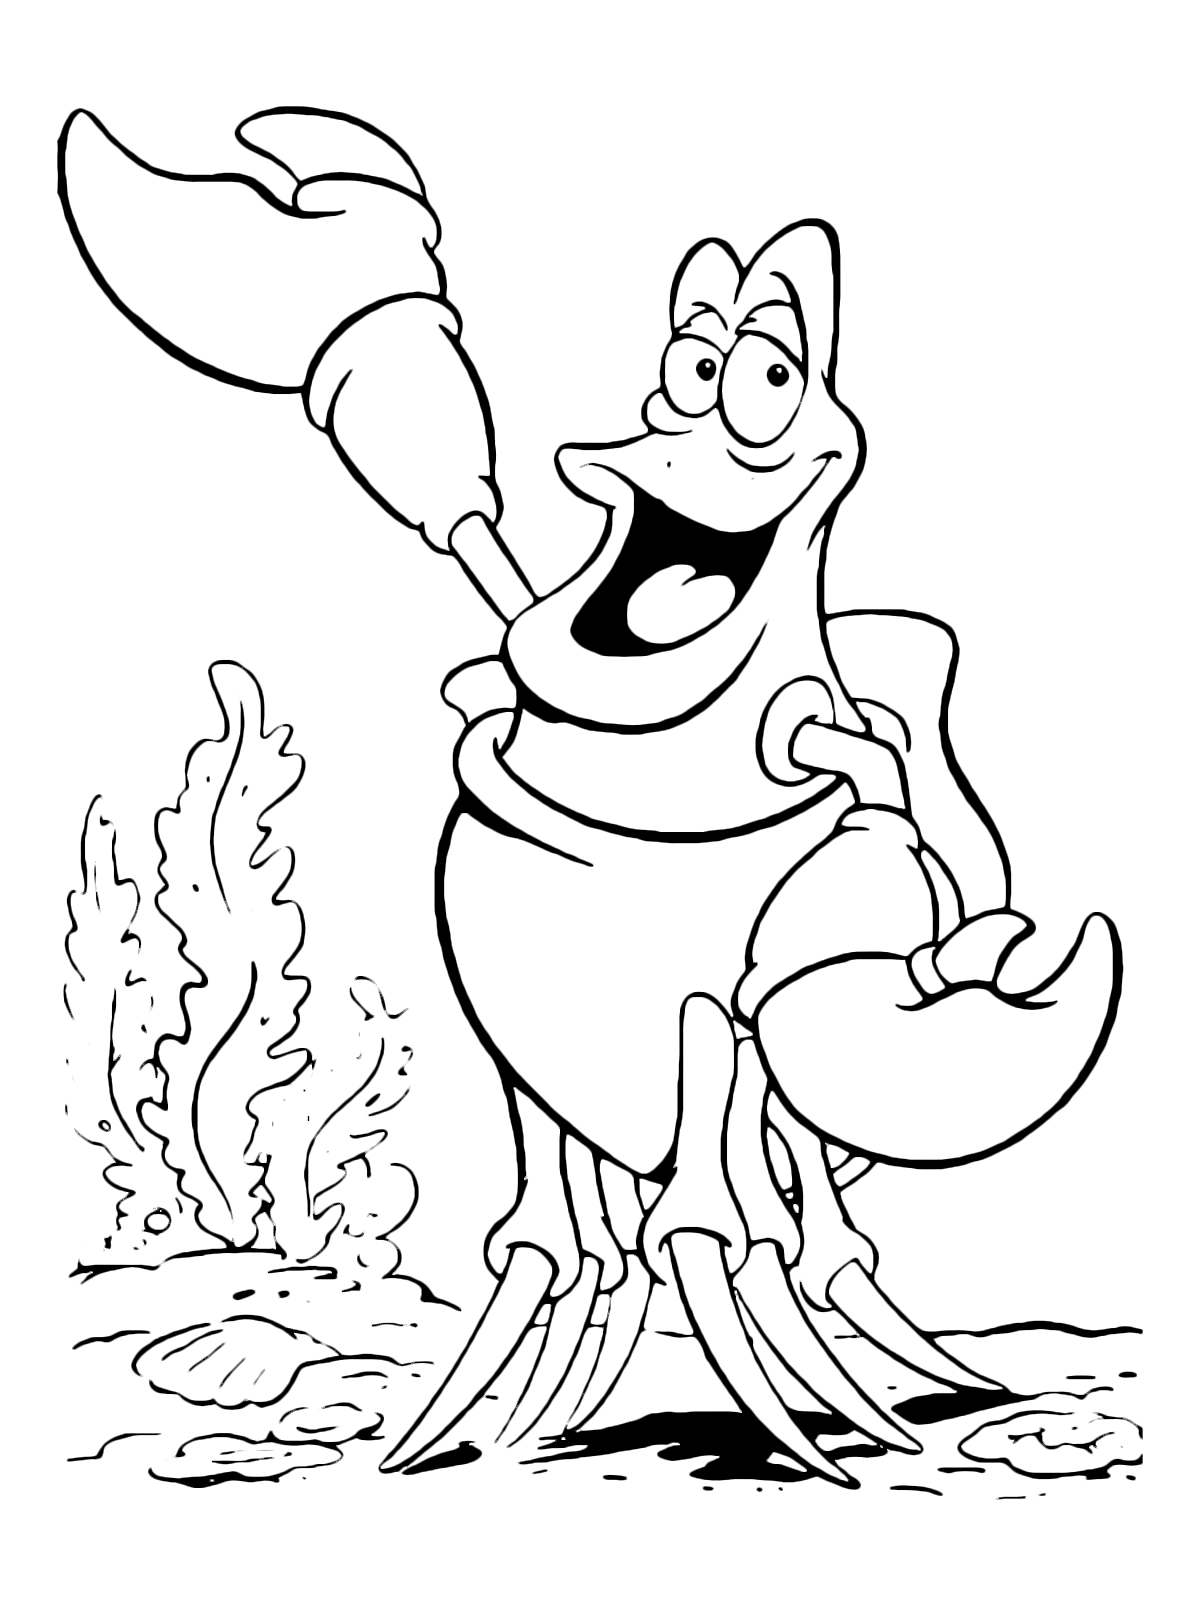 Download poolcleaners83: King Triton Little Mermaid Coloring Pages